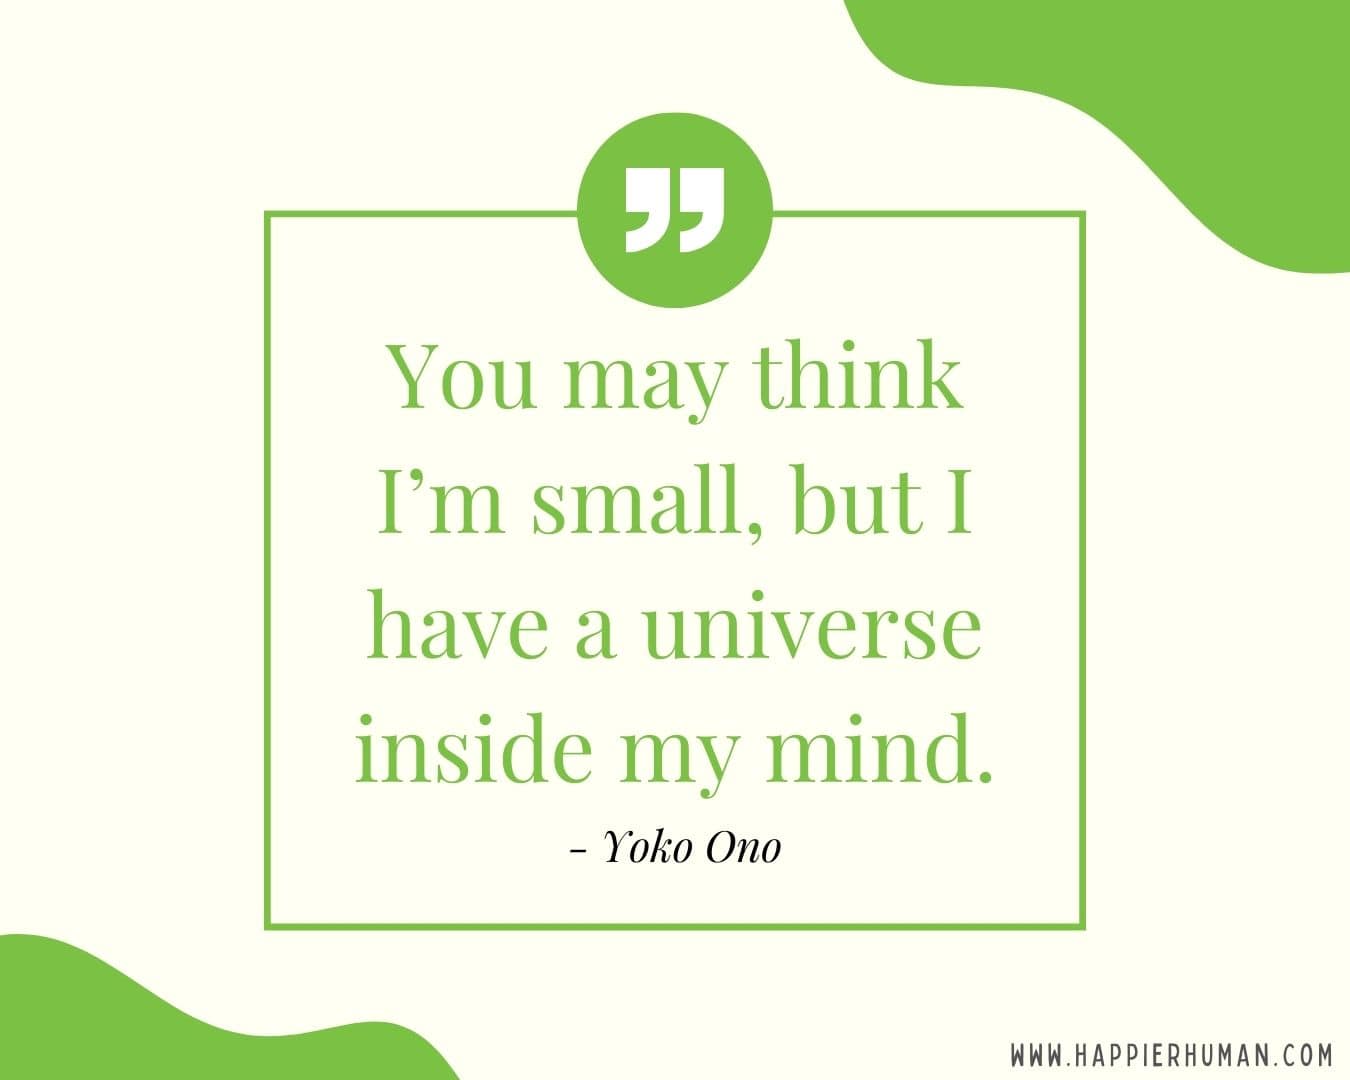 Introvert Quotes - “You may think I’m small, but I have a universe inside my mind.” – Yoko Ono